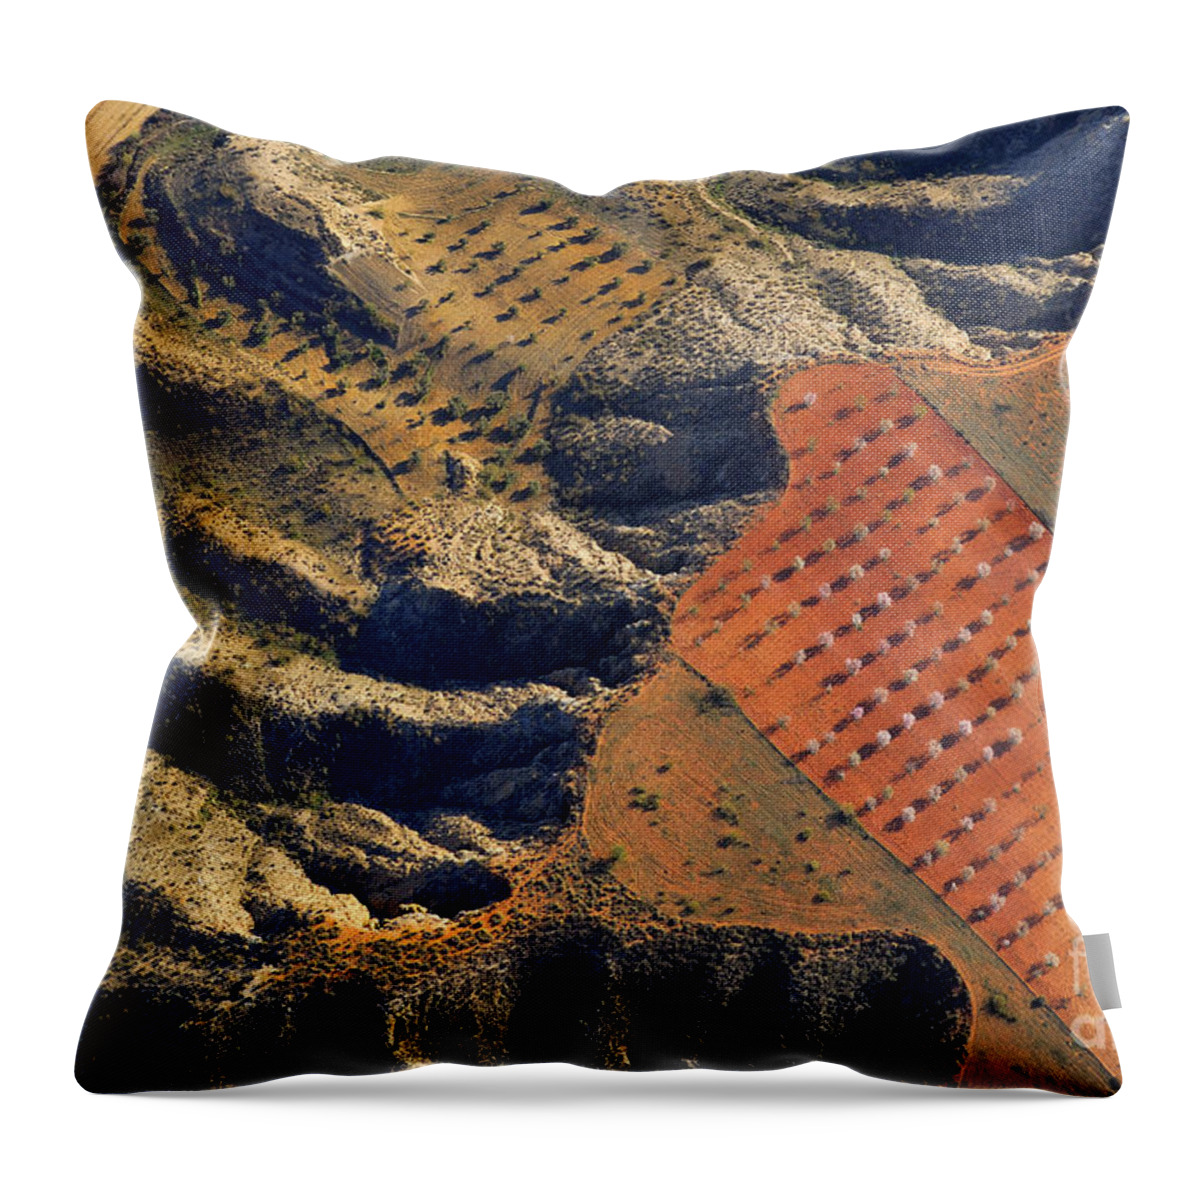 Bad Lands Throw Pillow featuring the photograph Bad Lands by Guido Montanes Castillo